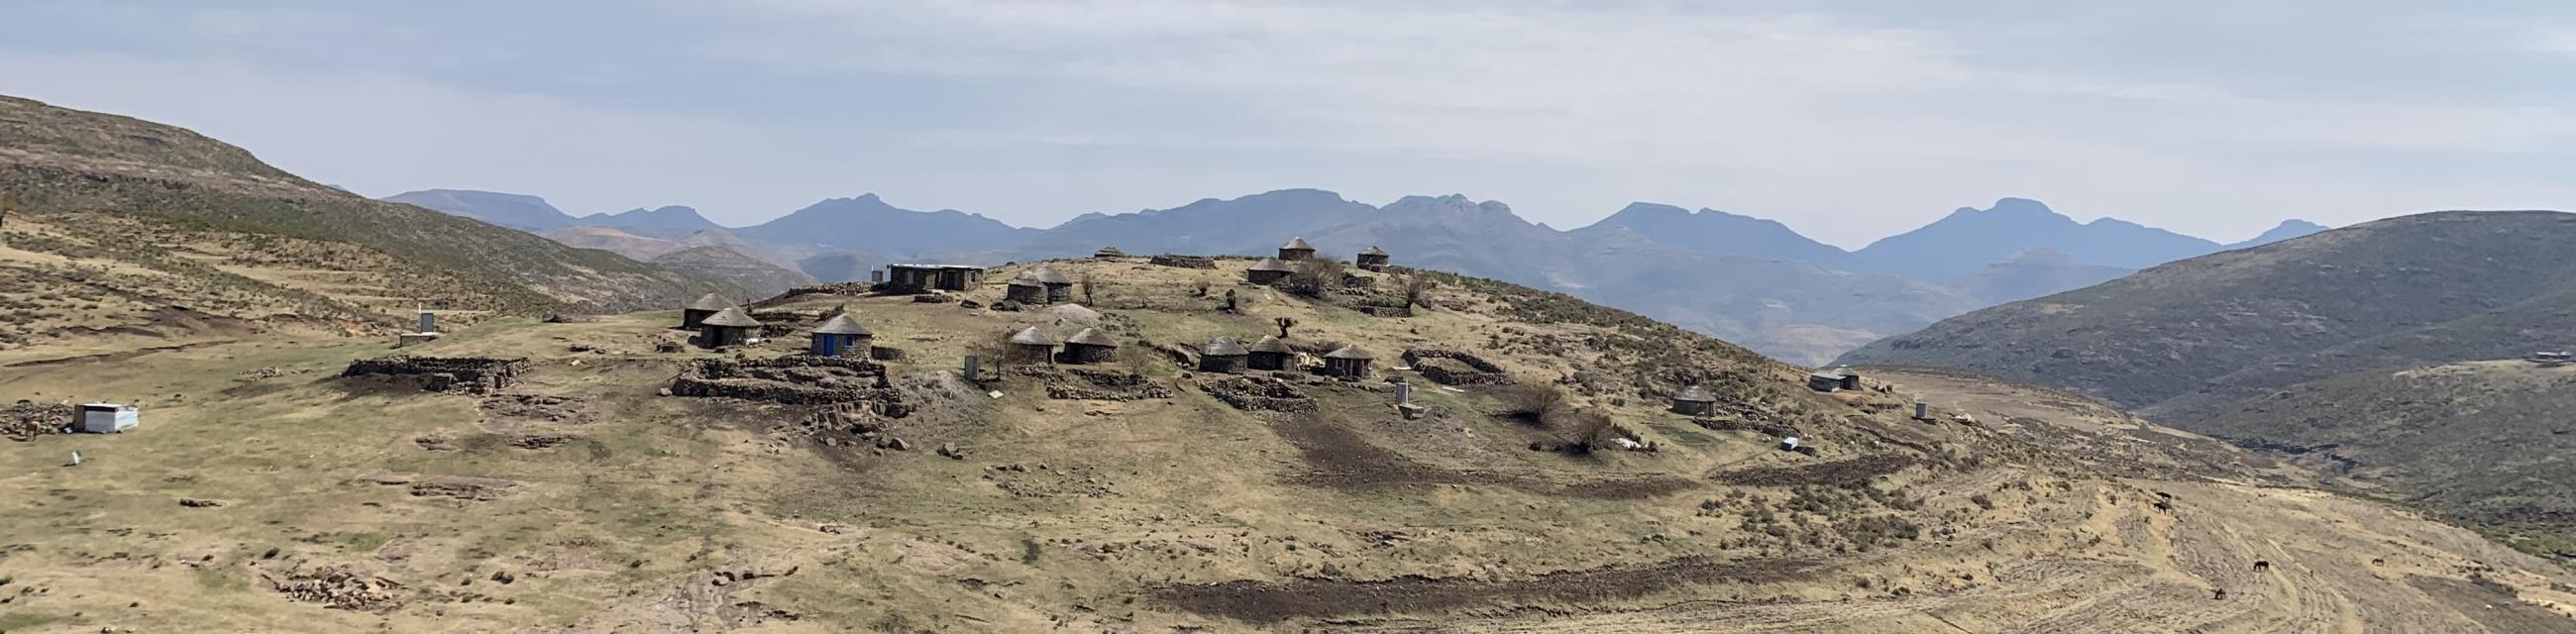 A small village with animal enclosures, 15 kilometers away from Semonkong. September 10, 2022. 